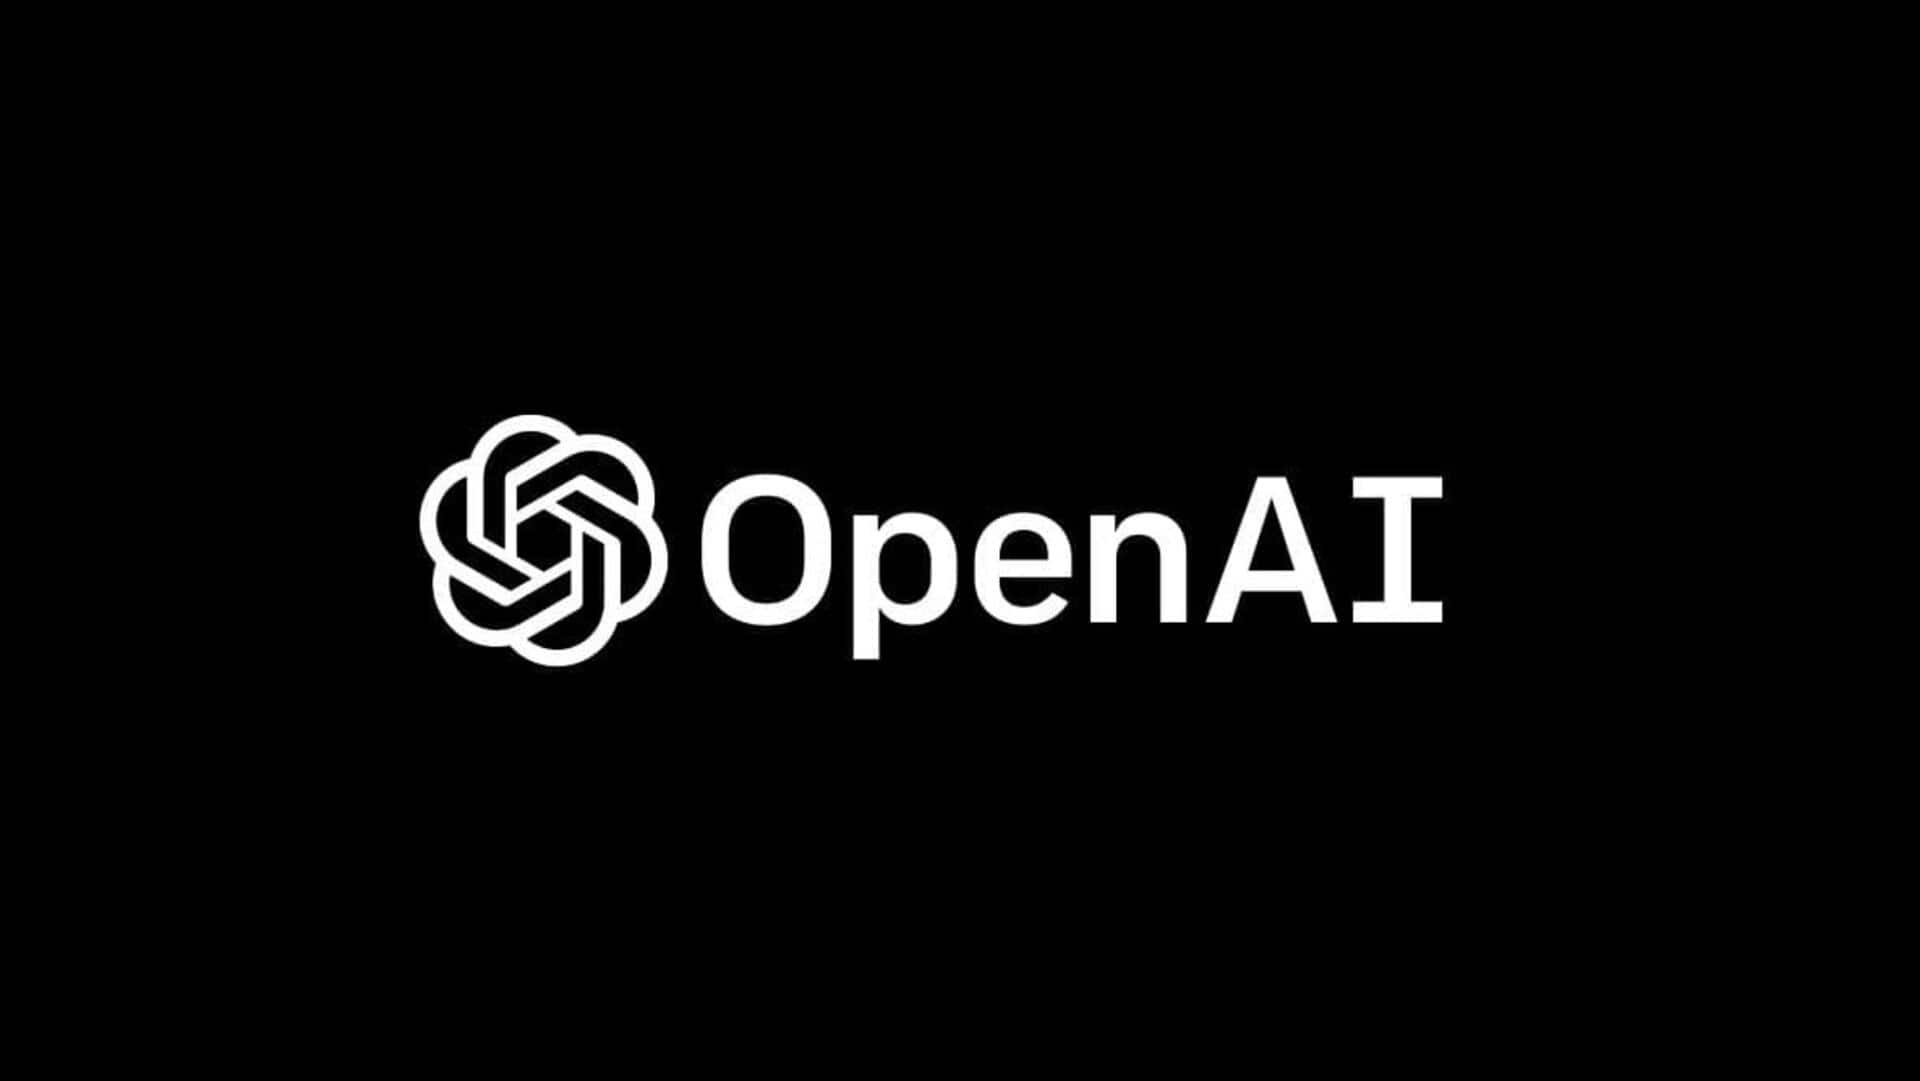 OpenAI introduces DALL-E 3, its newest text-to-image generation tool